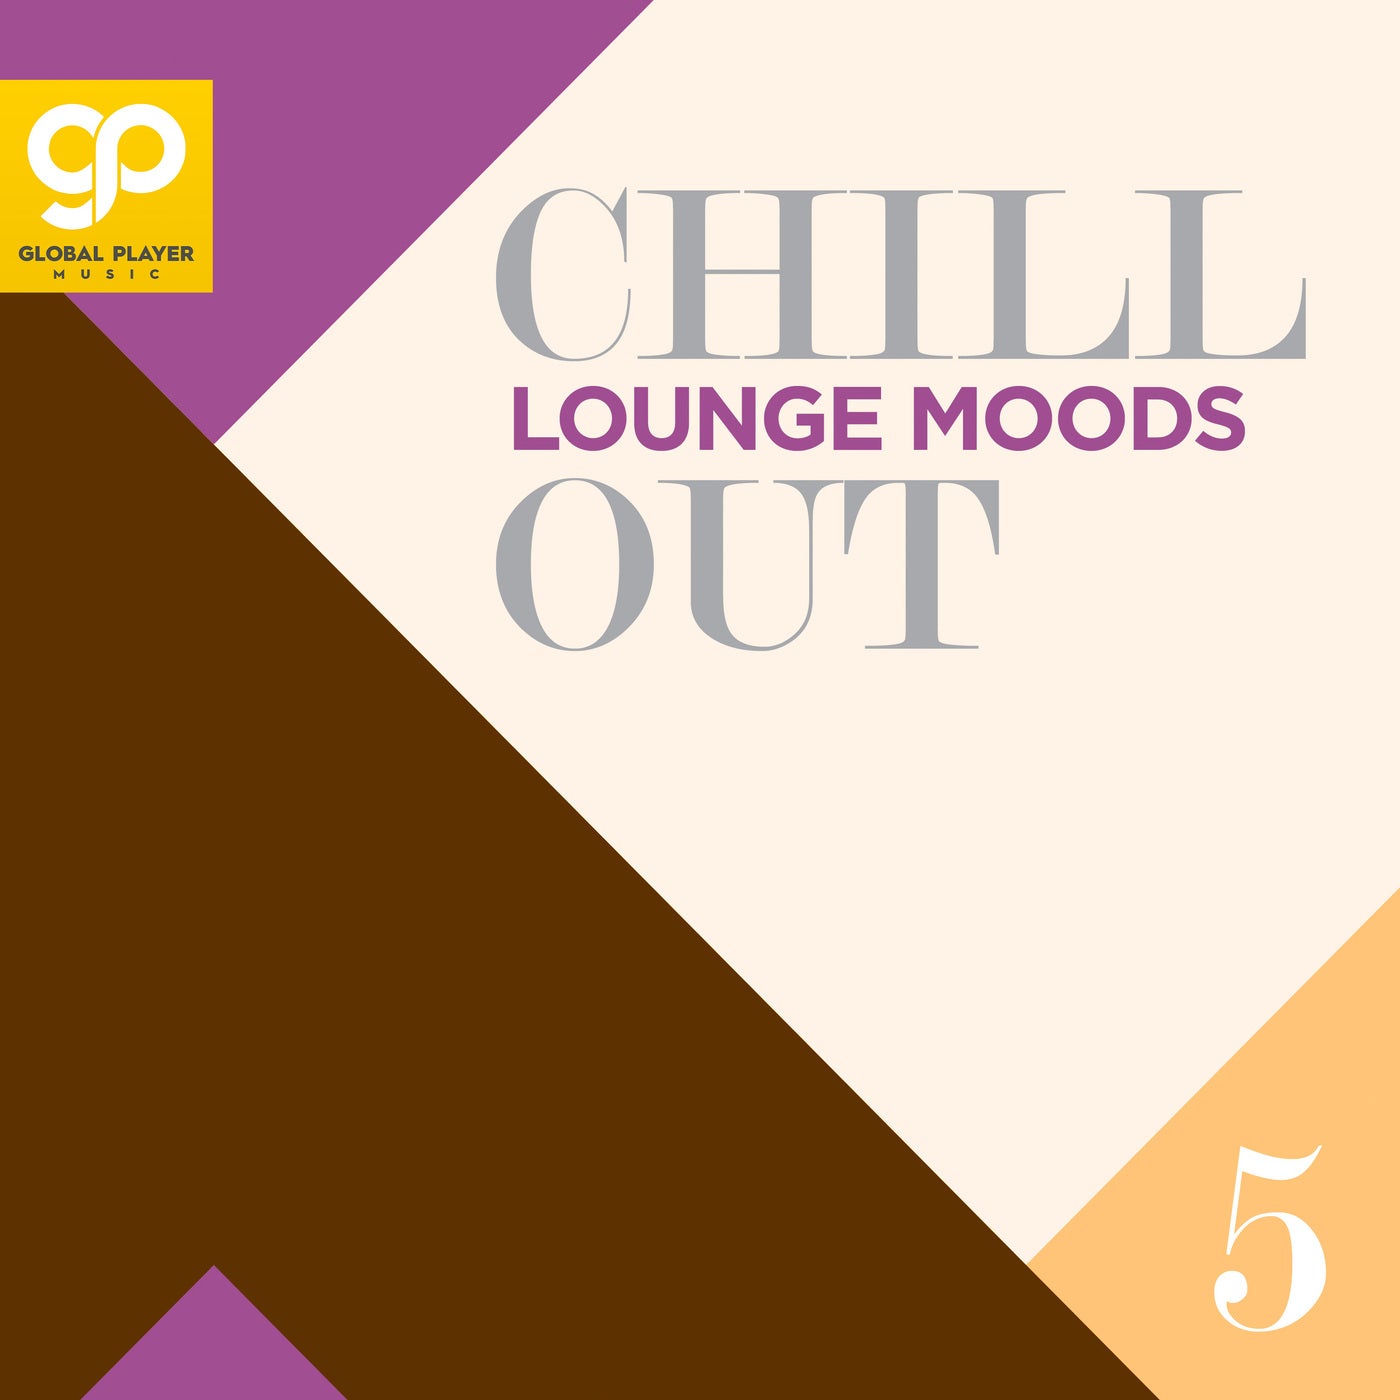 Chill Out Lounge Moods, Vol. 5